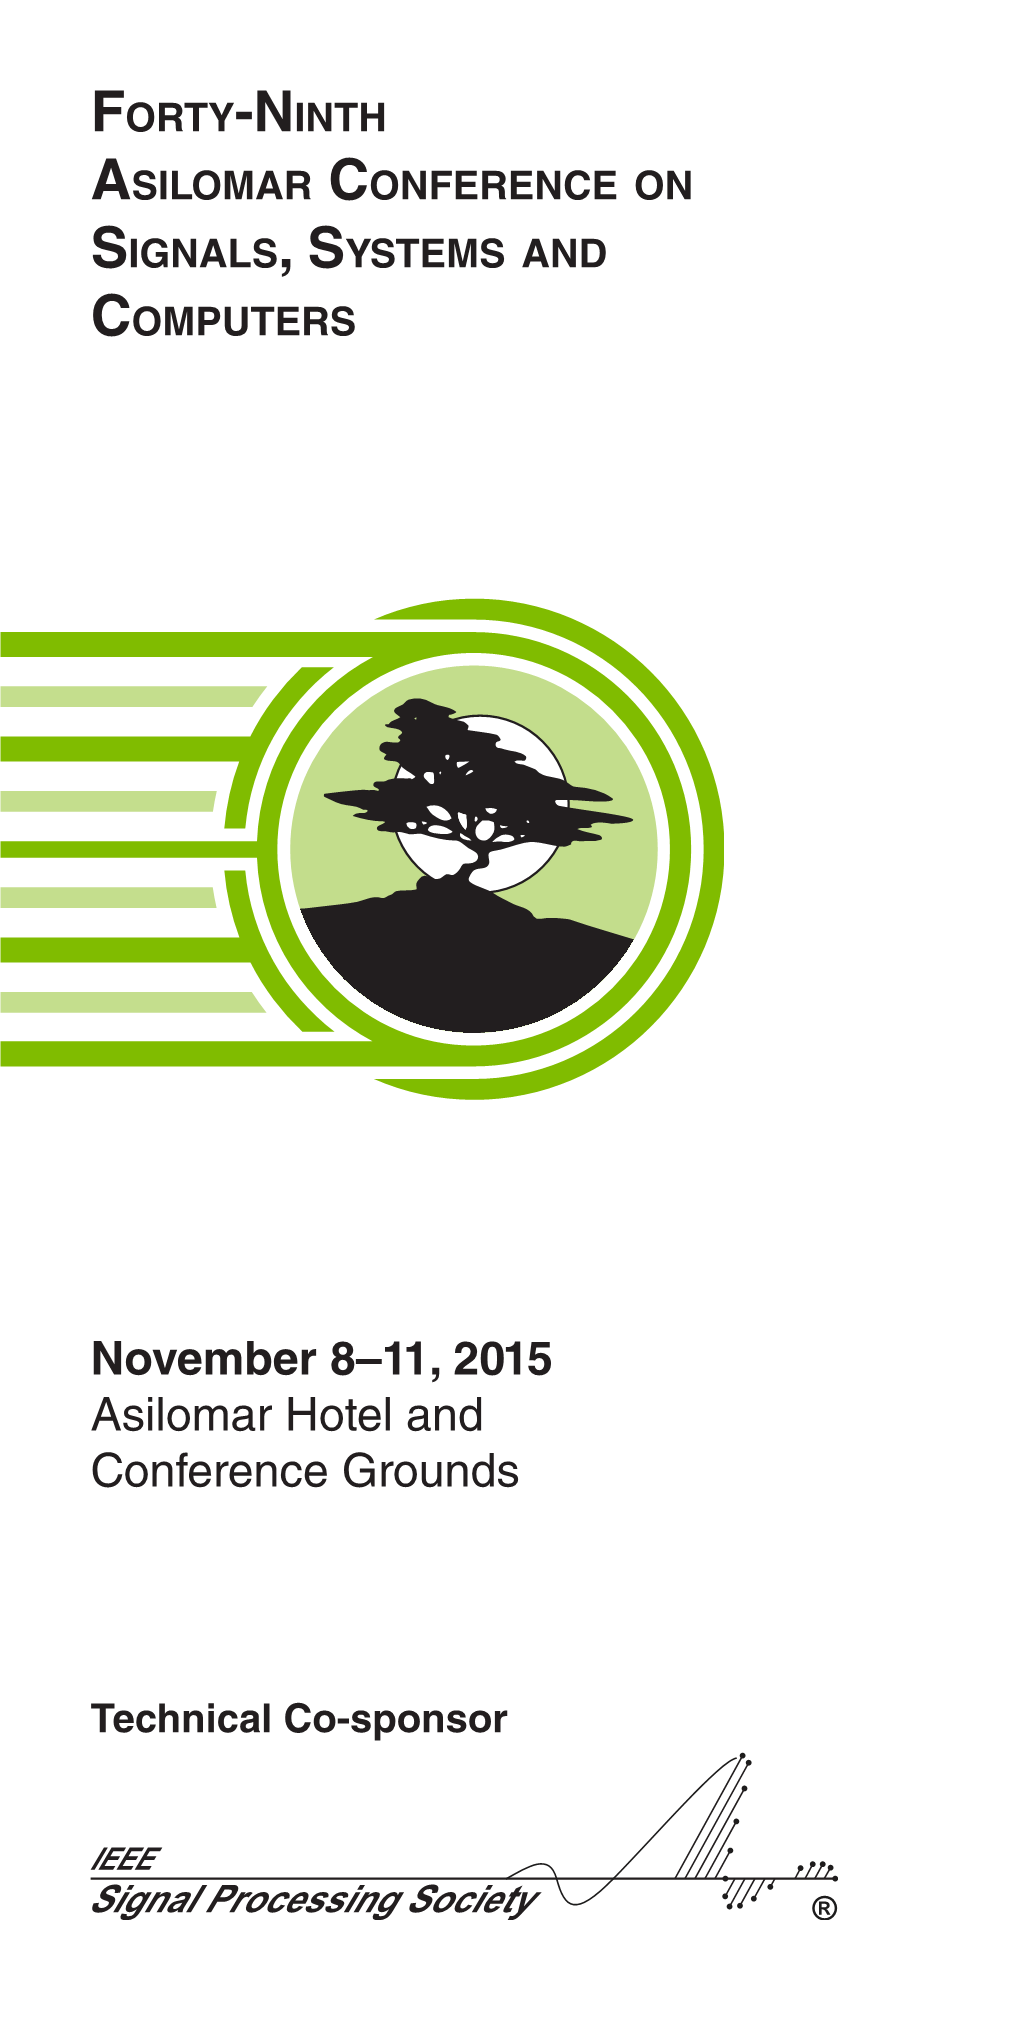 2015 Asilomar Conference Final Program in Single-Page Format